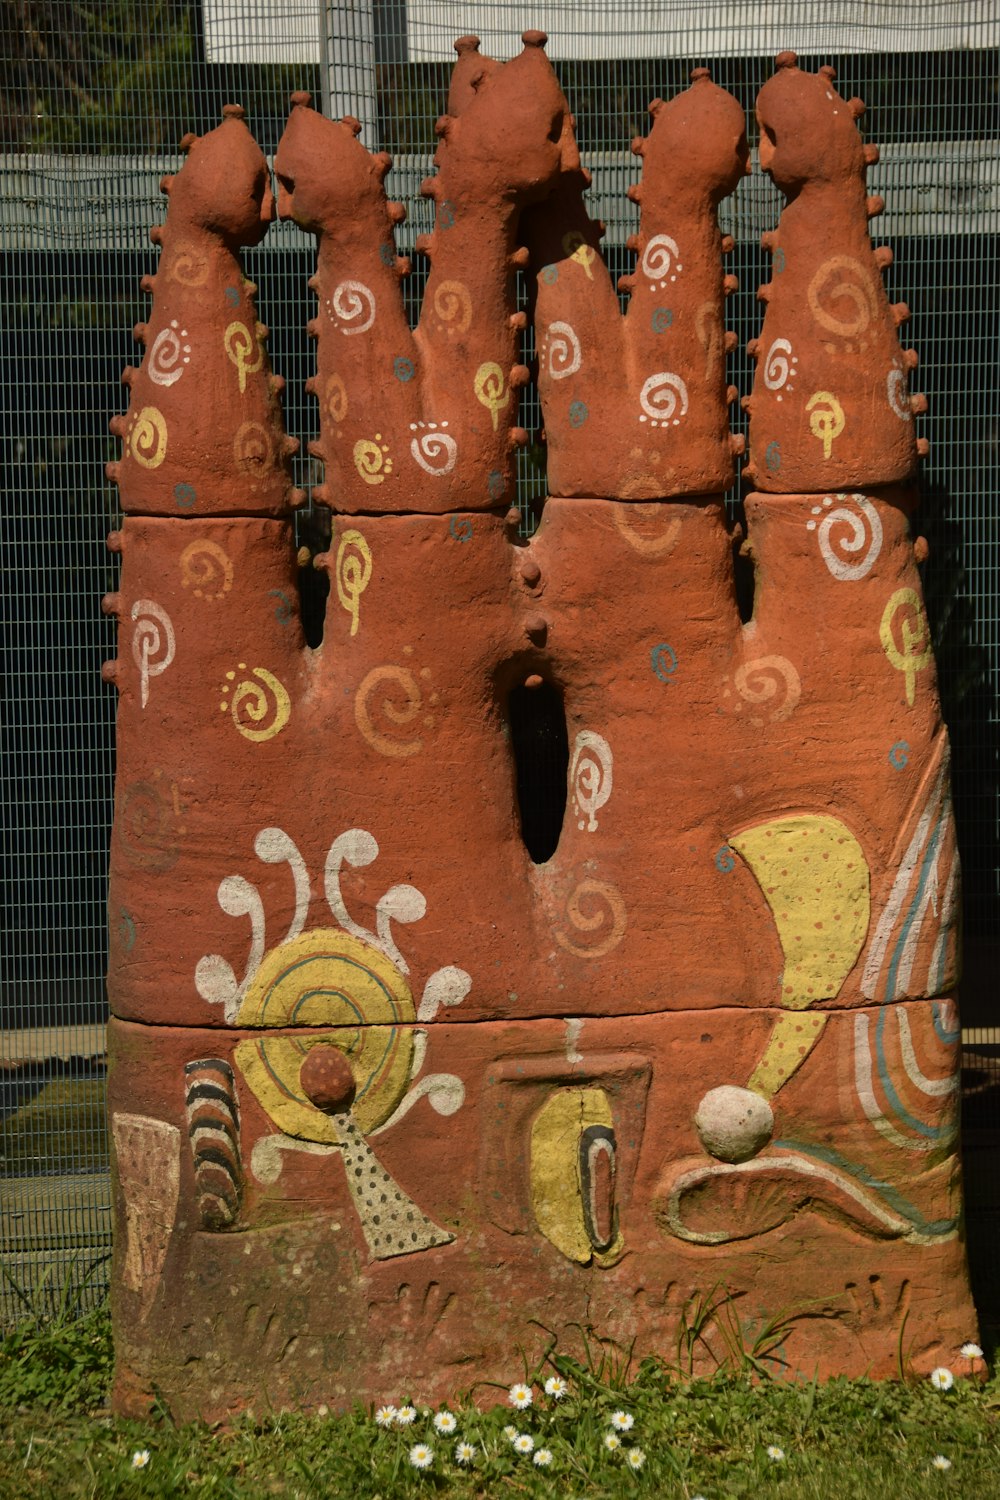 a clay sculpture of a castle made of clay